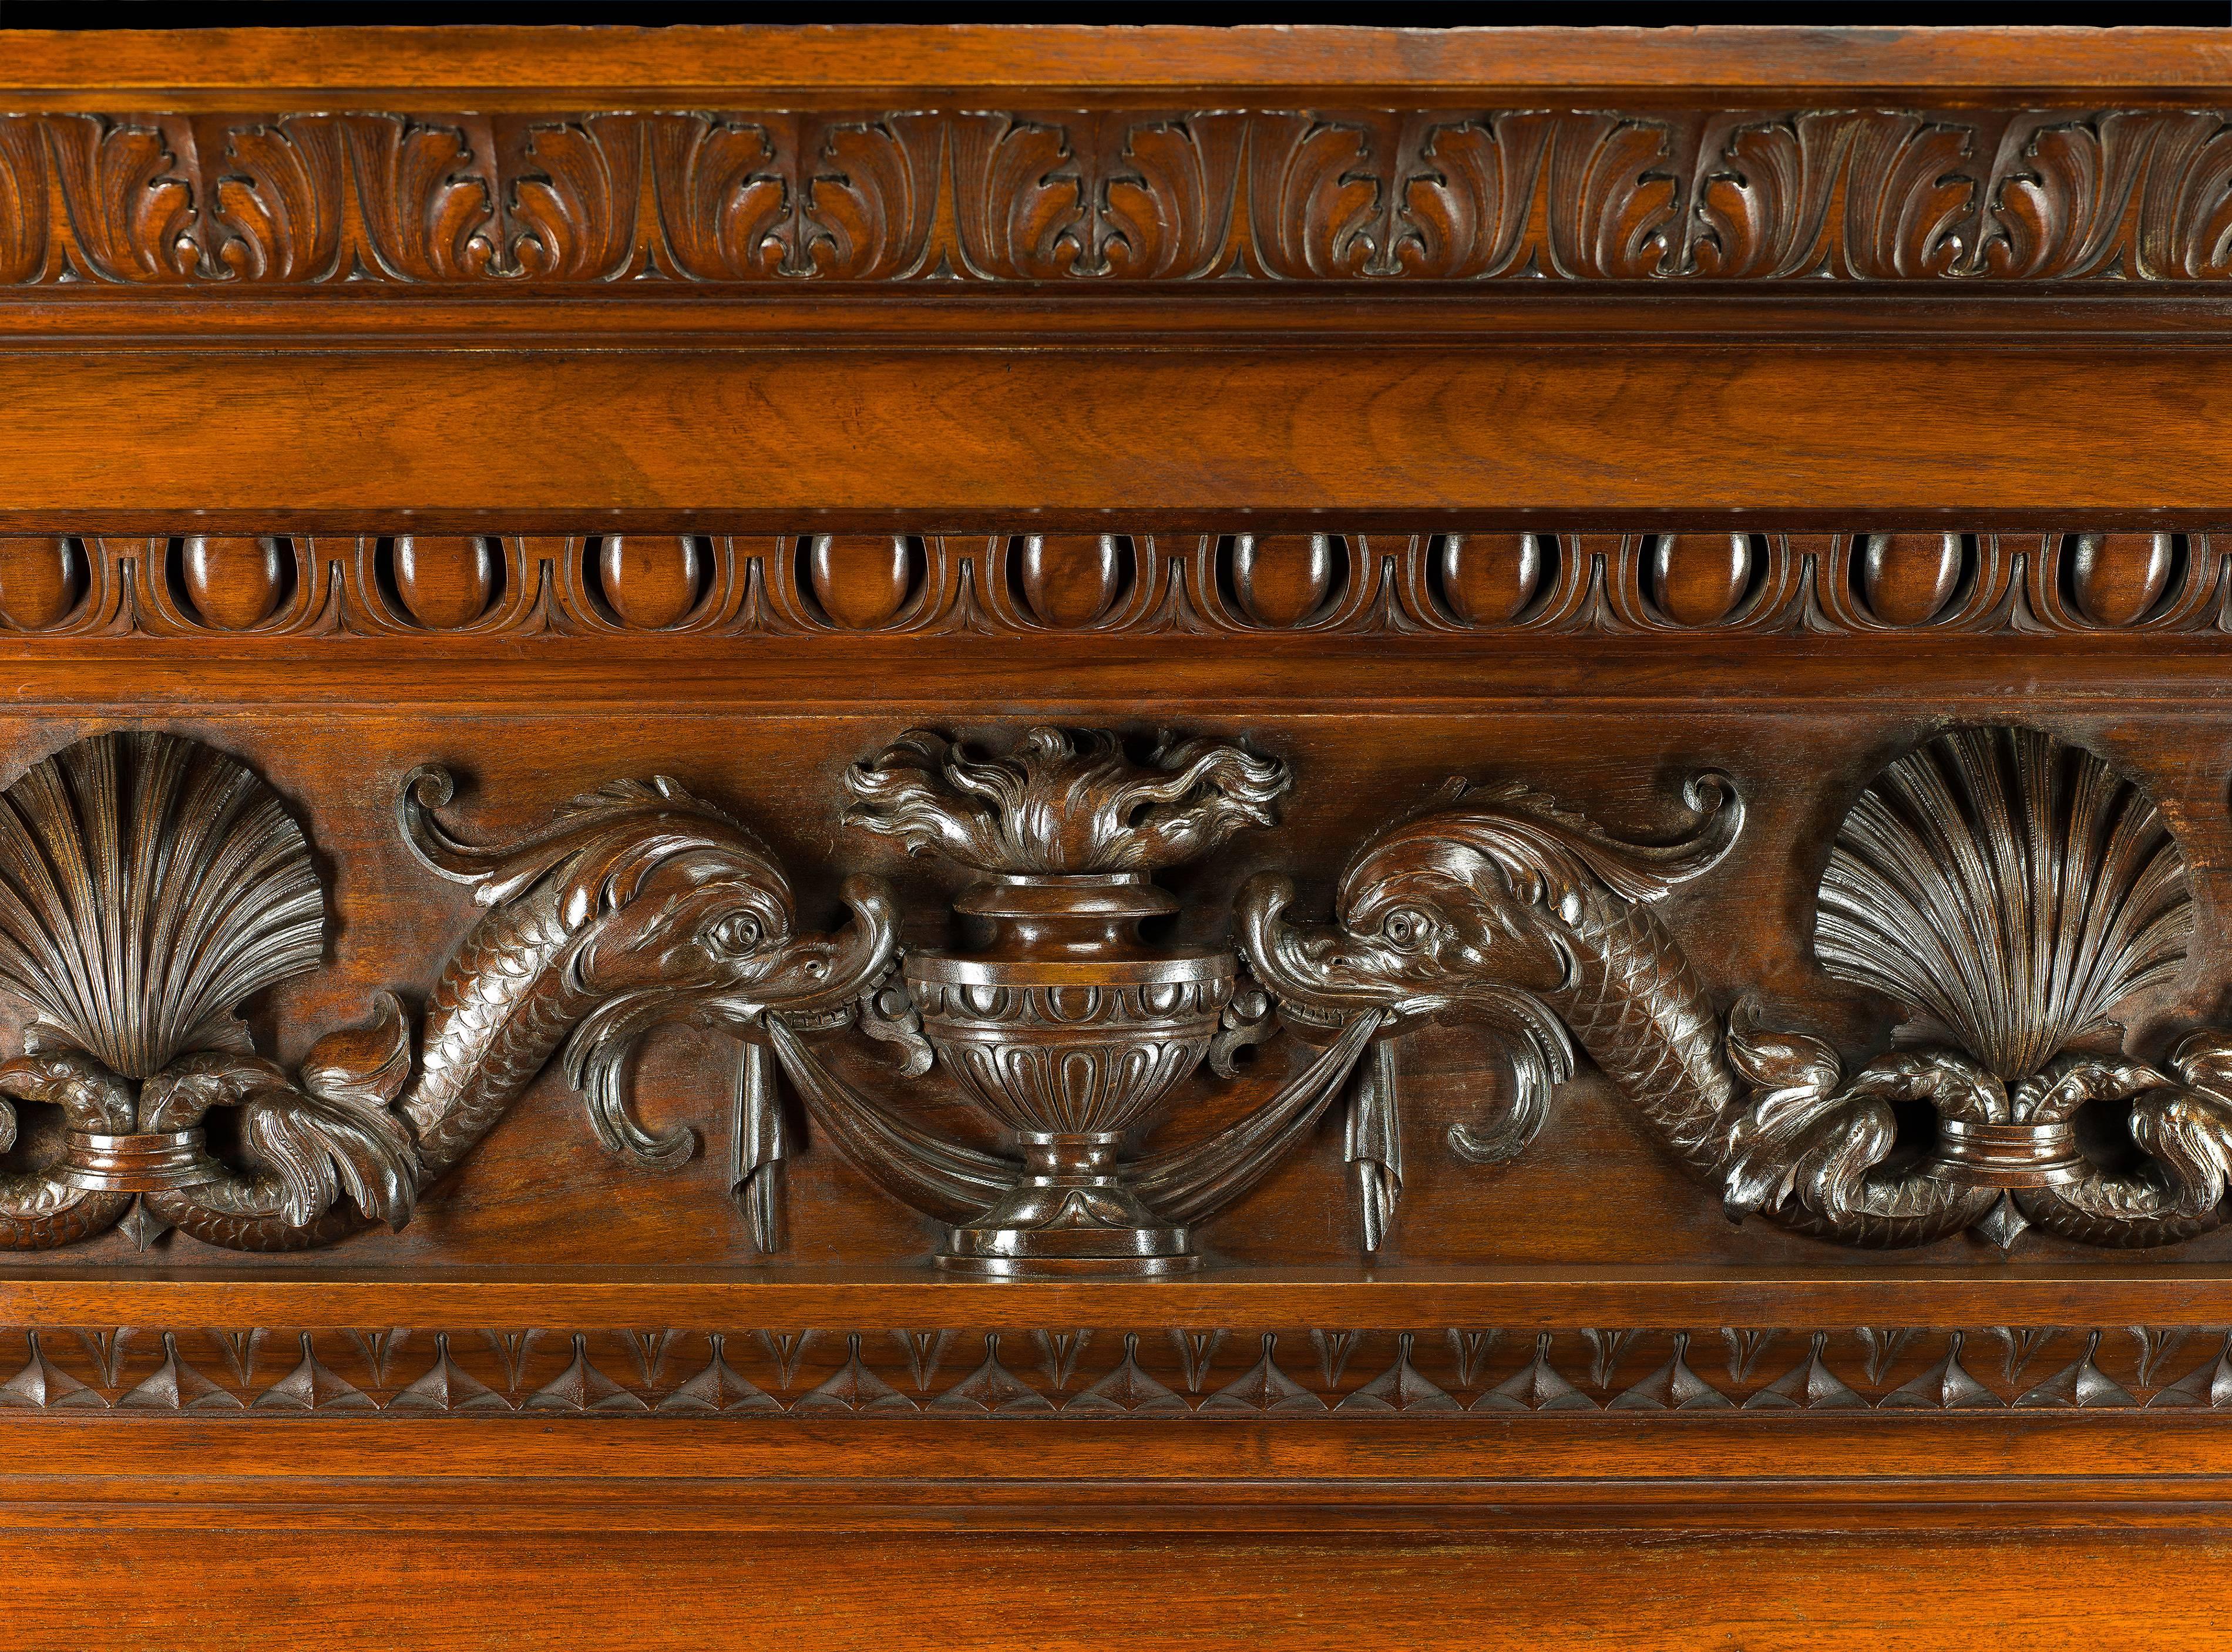 An enormous and grand antique walnut chimneypiece in the neoclassical style. The frieze elaborately carved with three pairs of sea serpents alternating with flambeau urns and scallop shells. The shells are repeated on the panelled surround of the